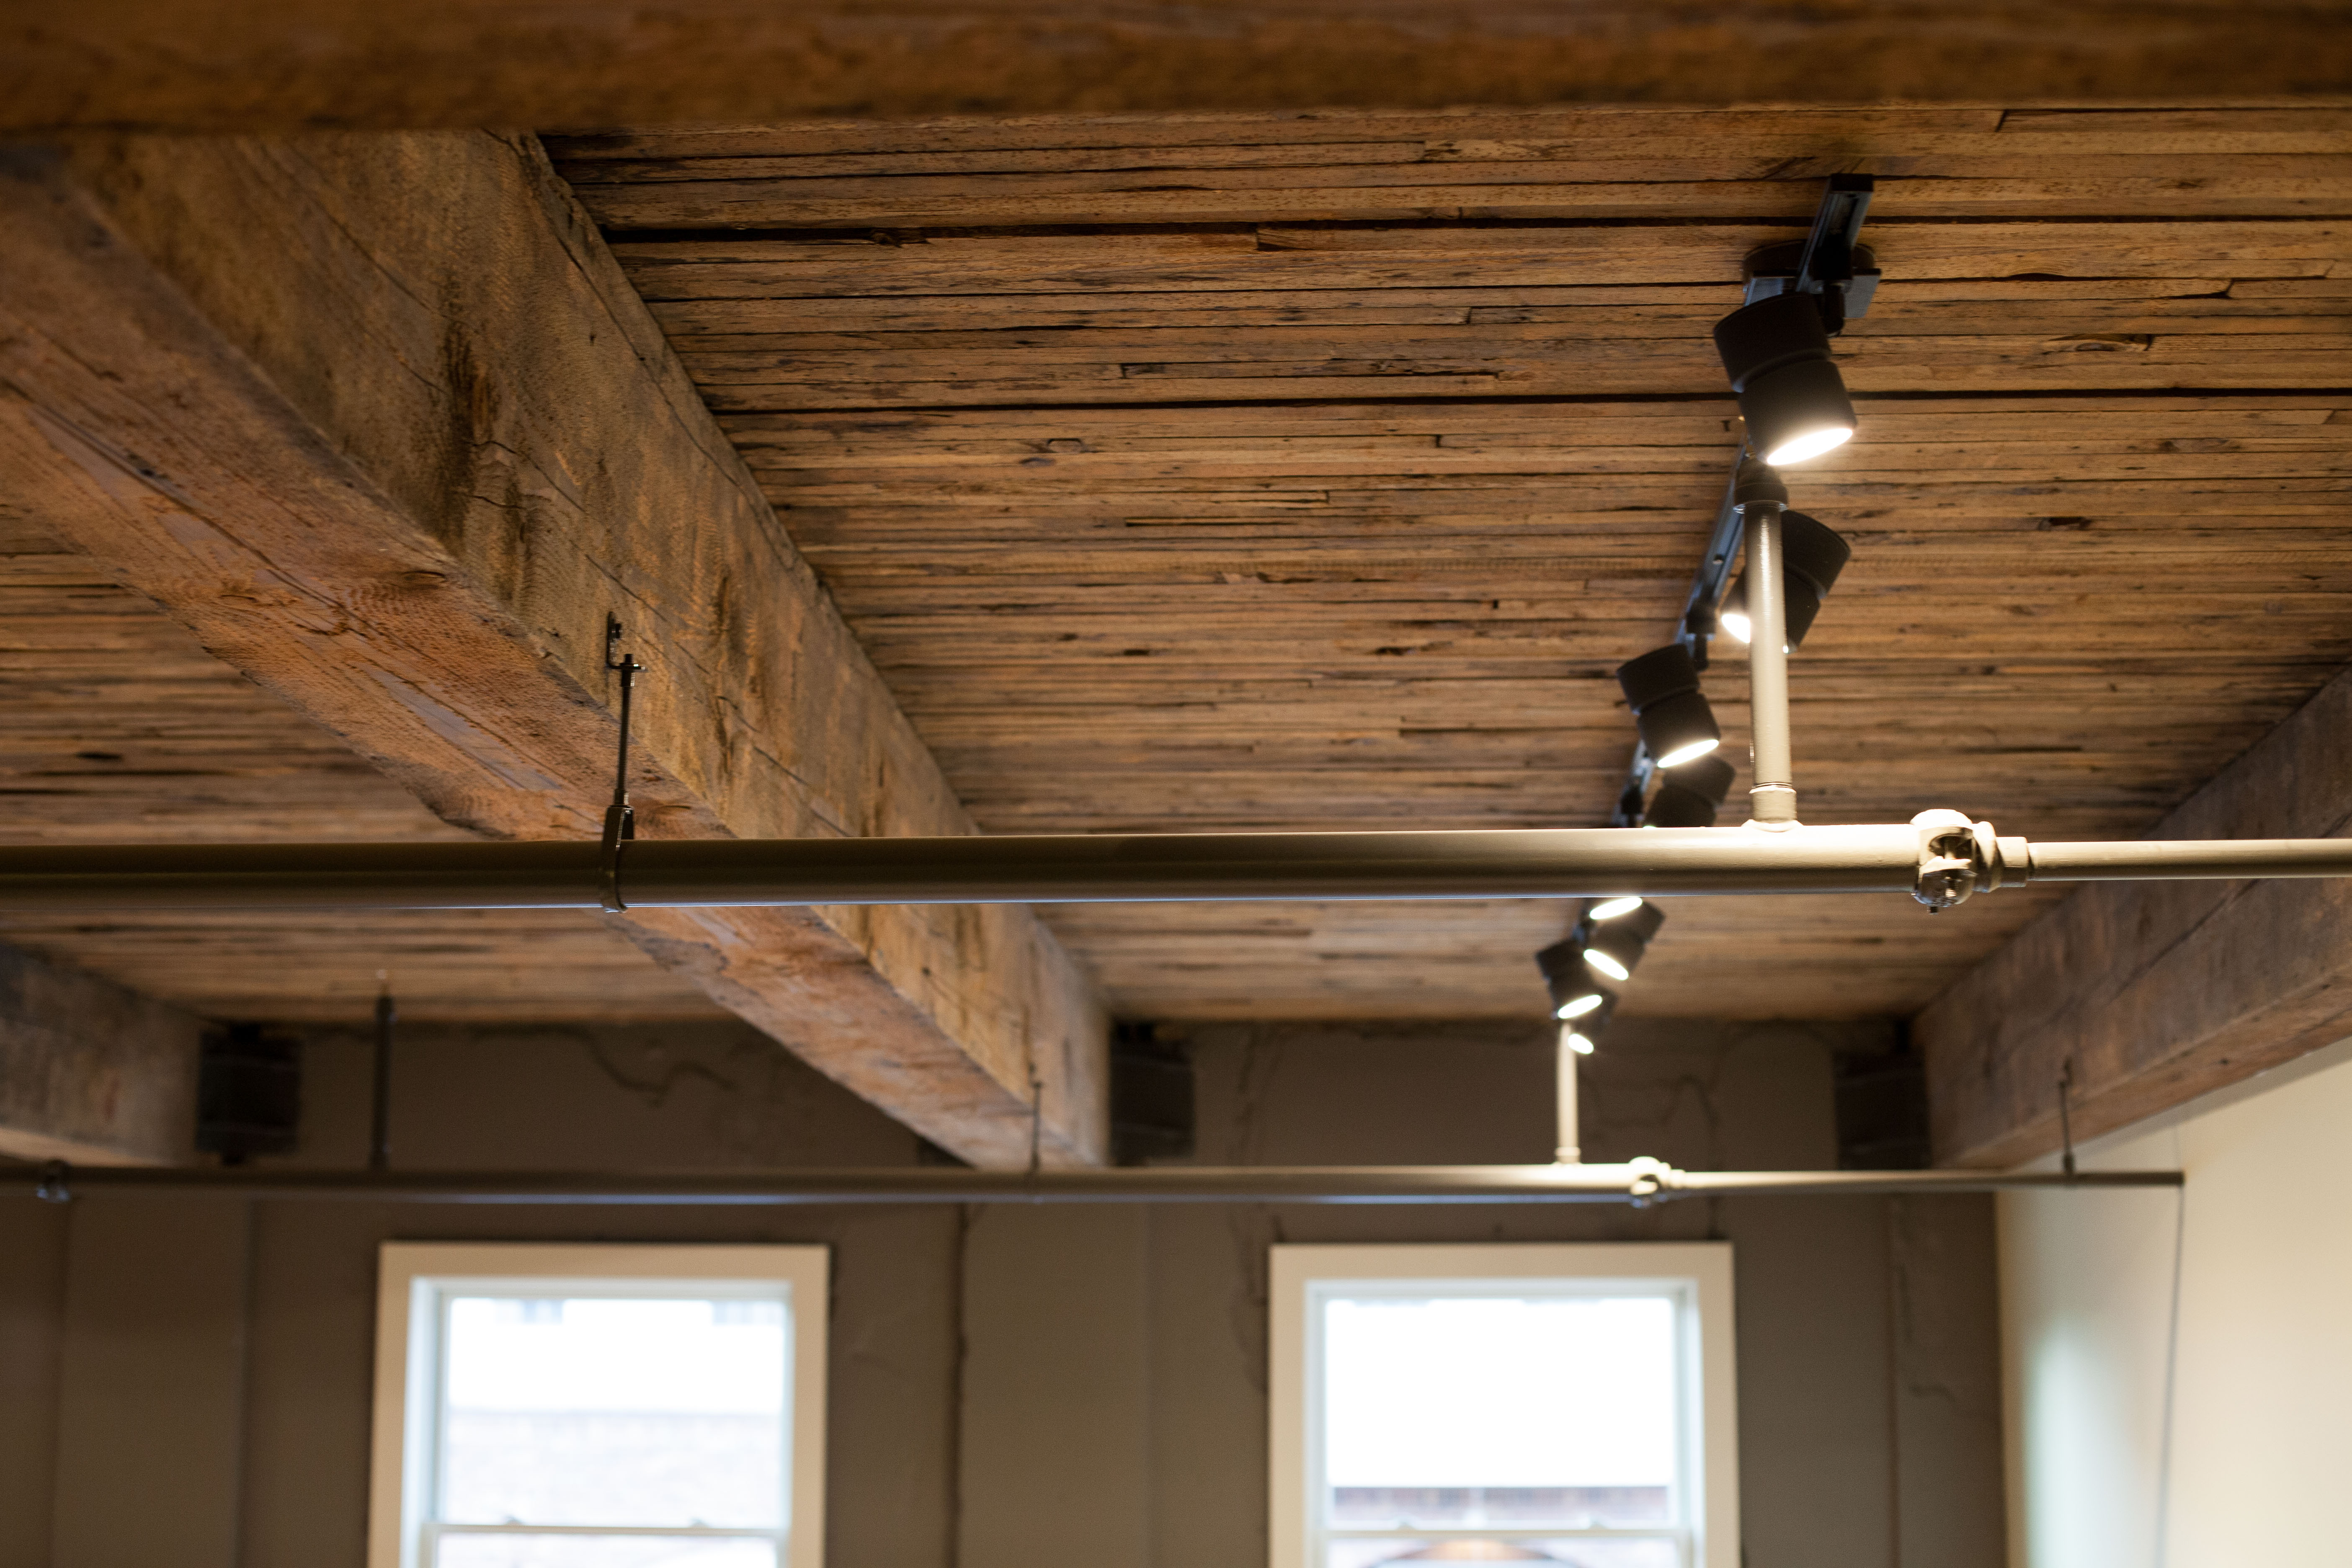 Exposed historic wood ceilings in a Loft Room of the Inn at Lynden.